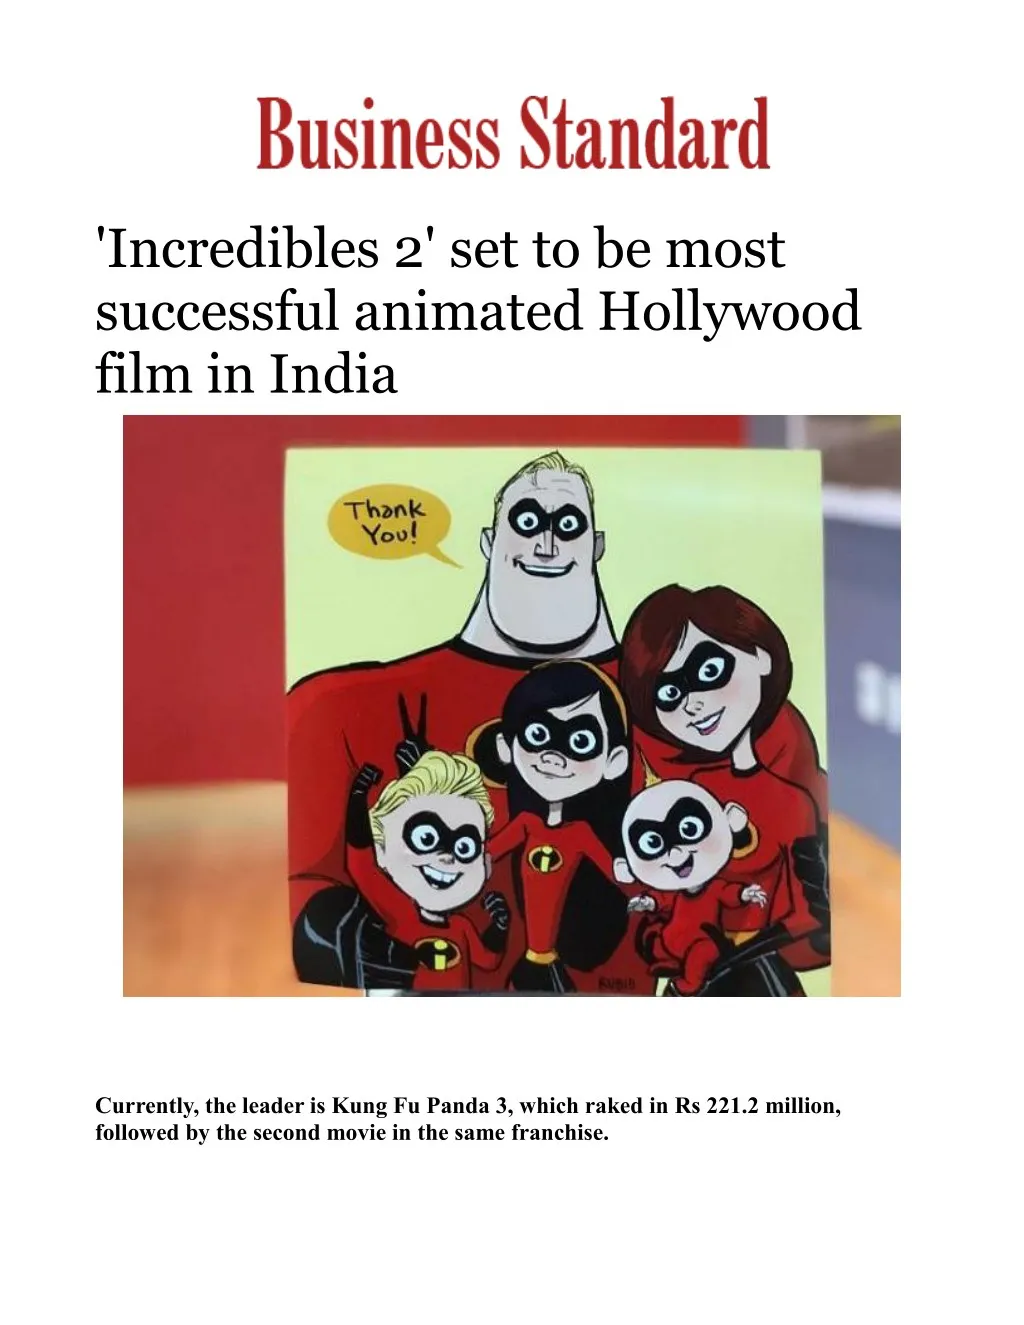 incredibles 2 set to be most successful animated